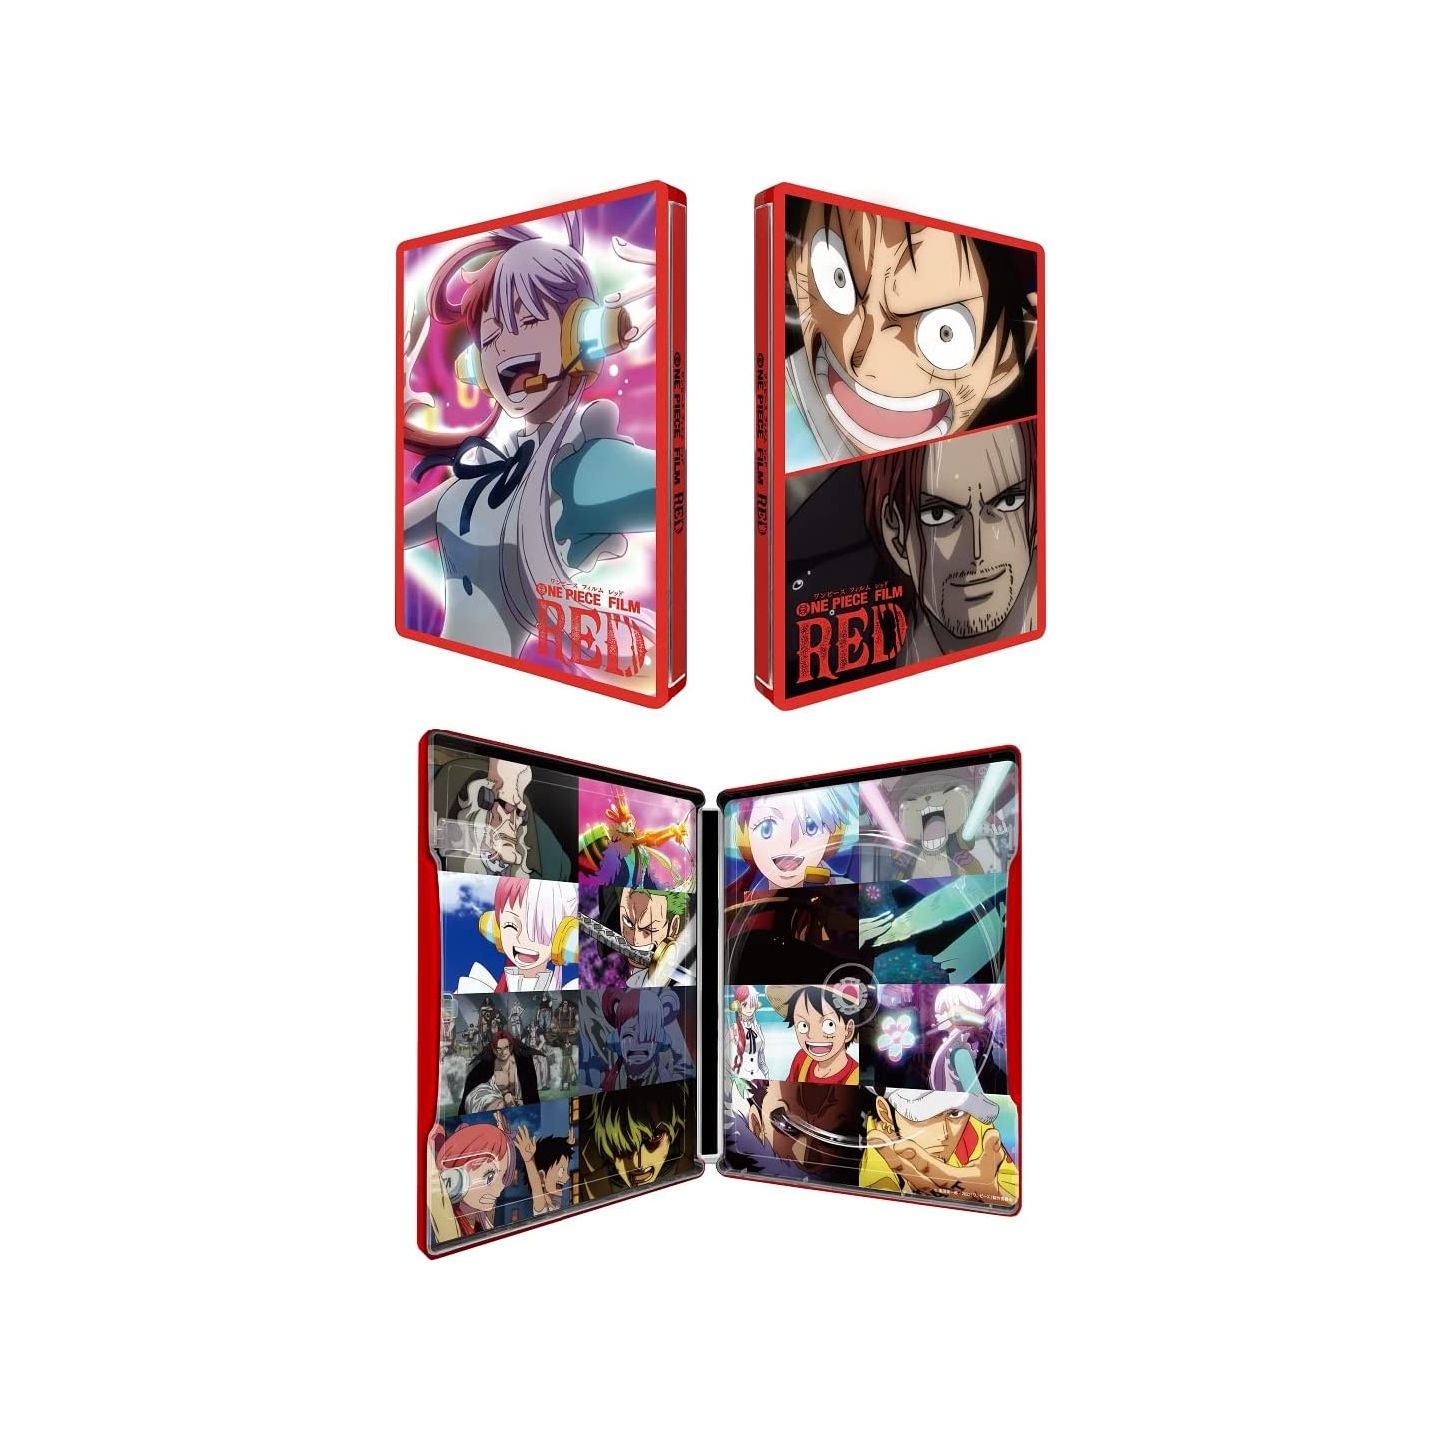 One Piece Film Red Deluxe Limited Edition [Ultra HD Blu-ray + Blu